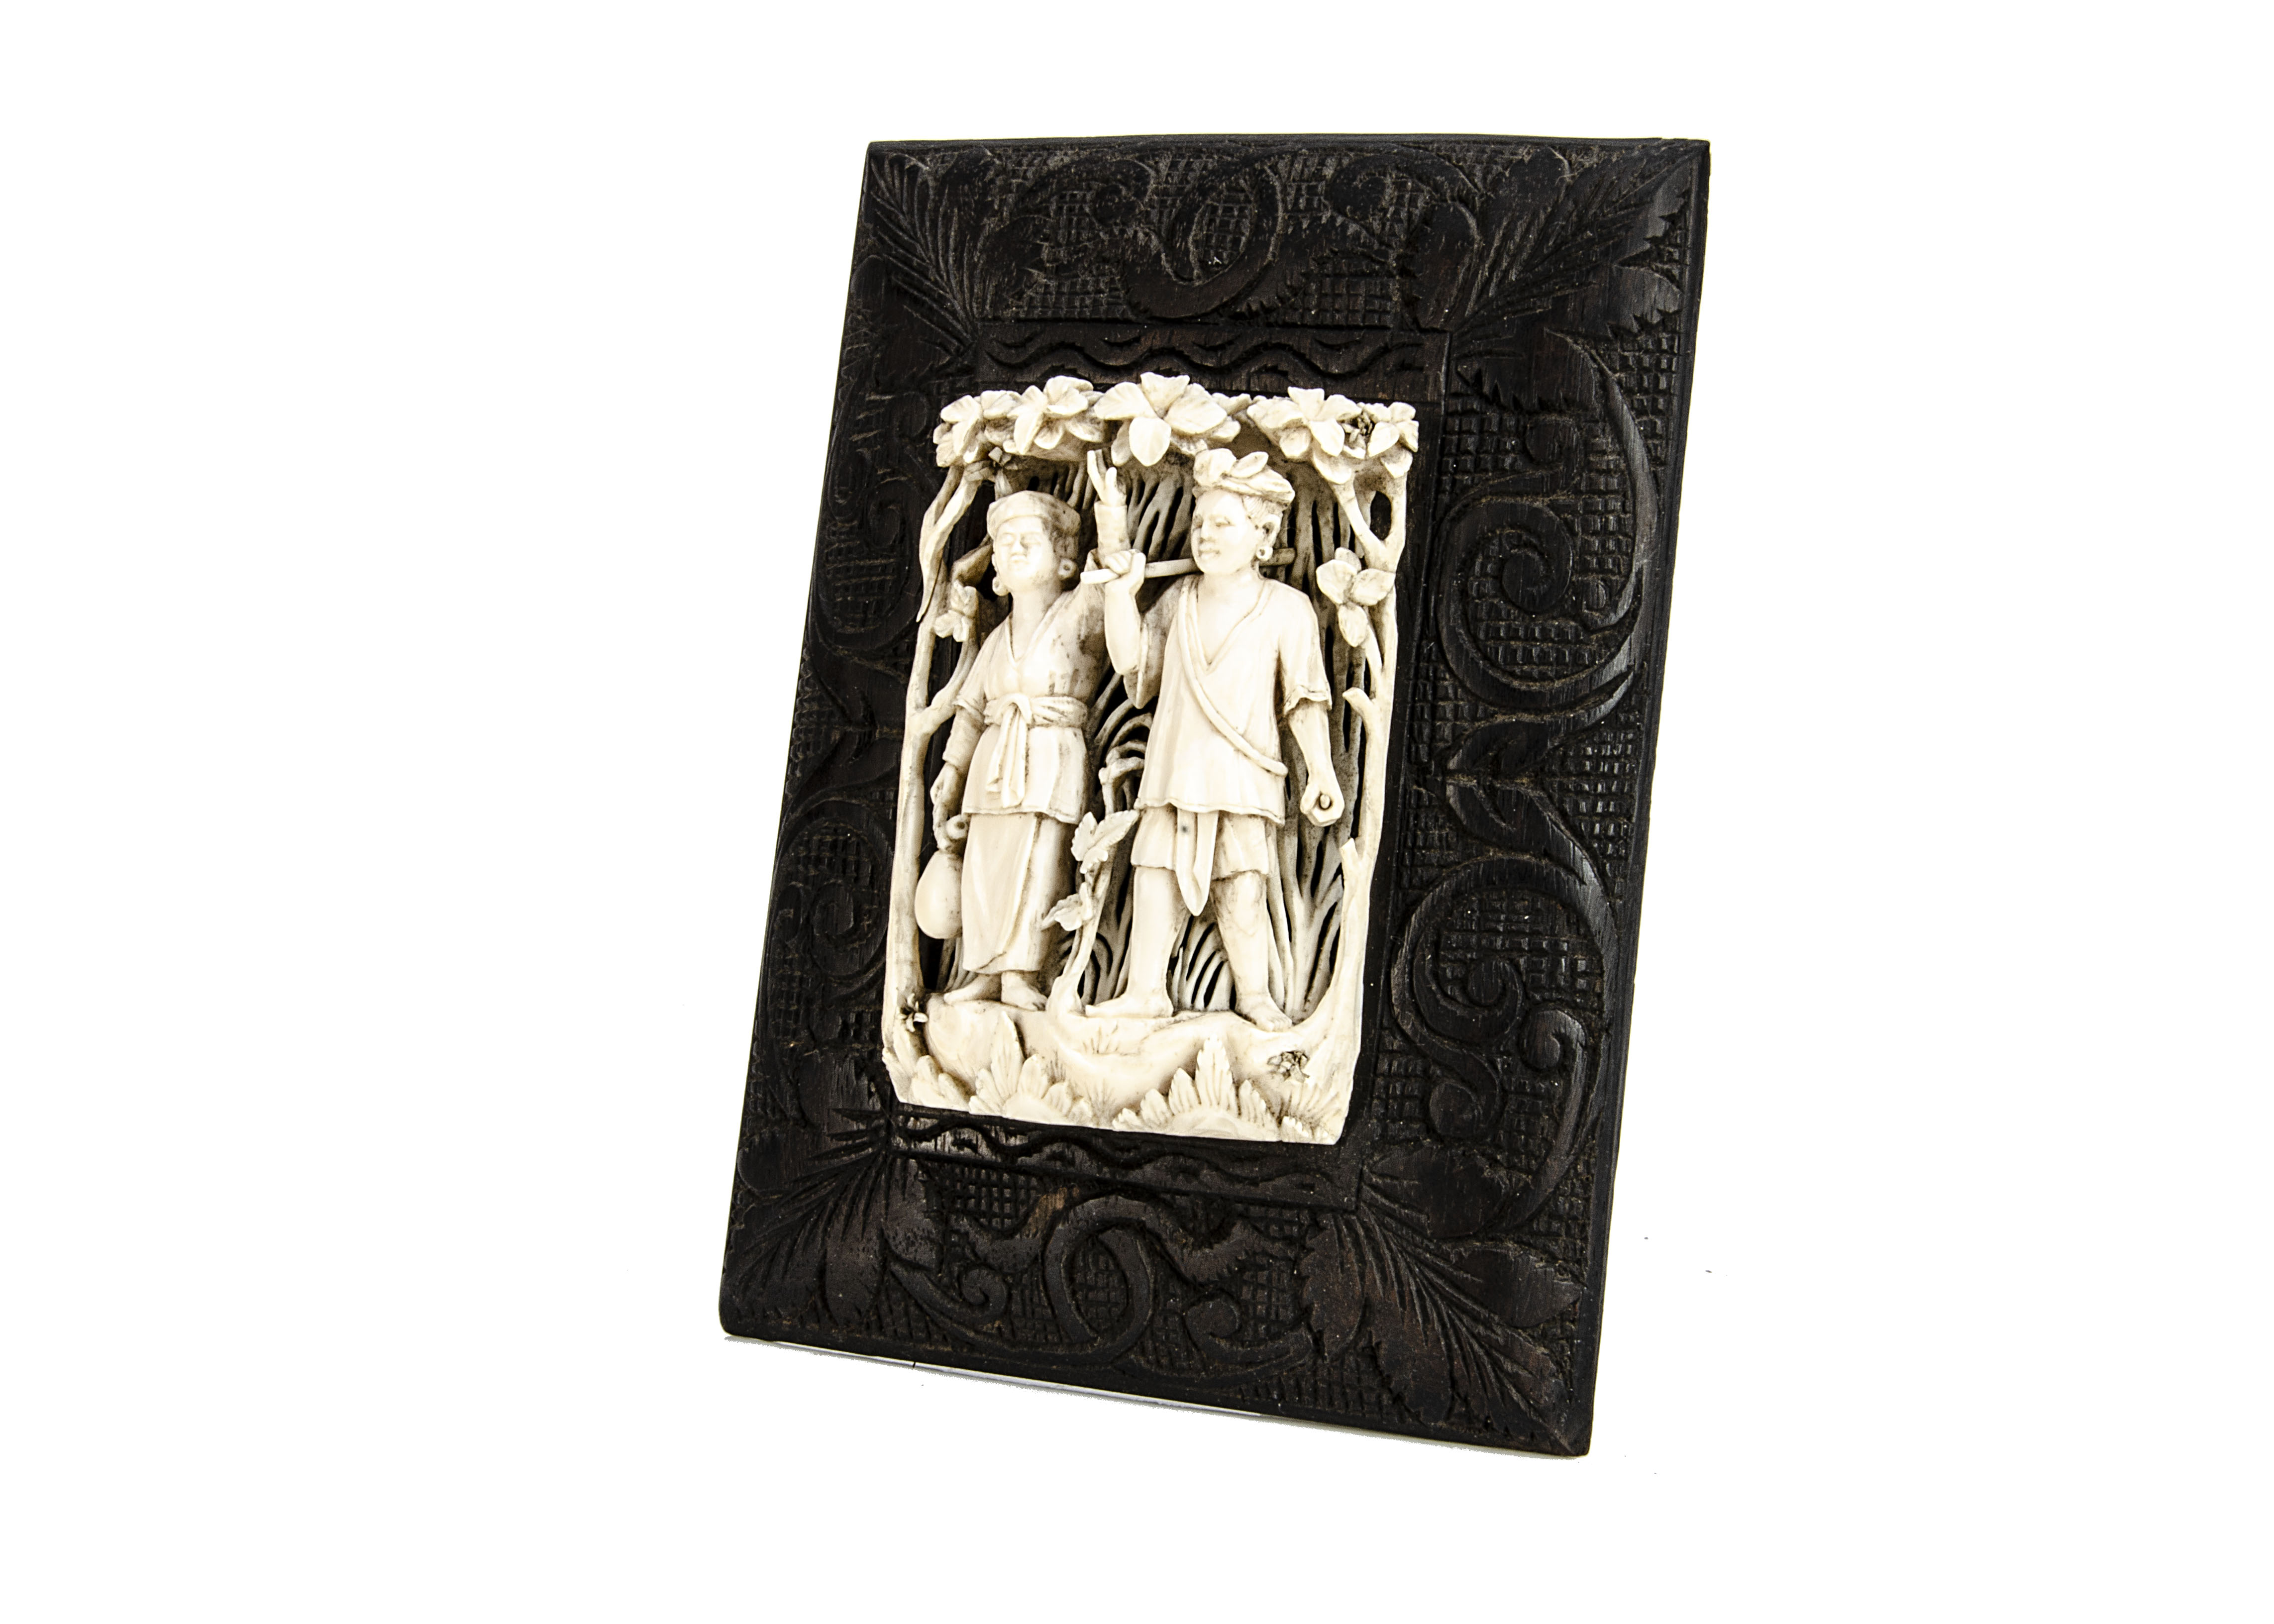 A late 19th century Indian carved ivory decoration, with two figures in a floral setting, mounted on